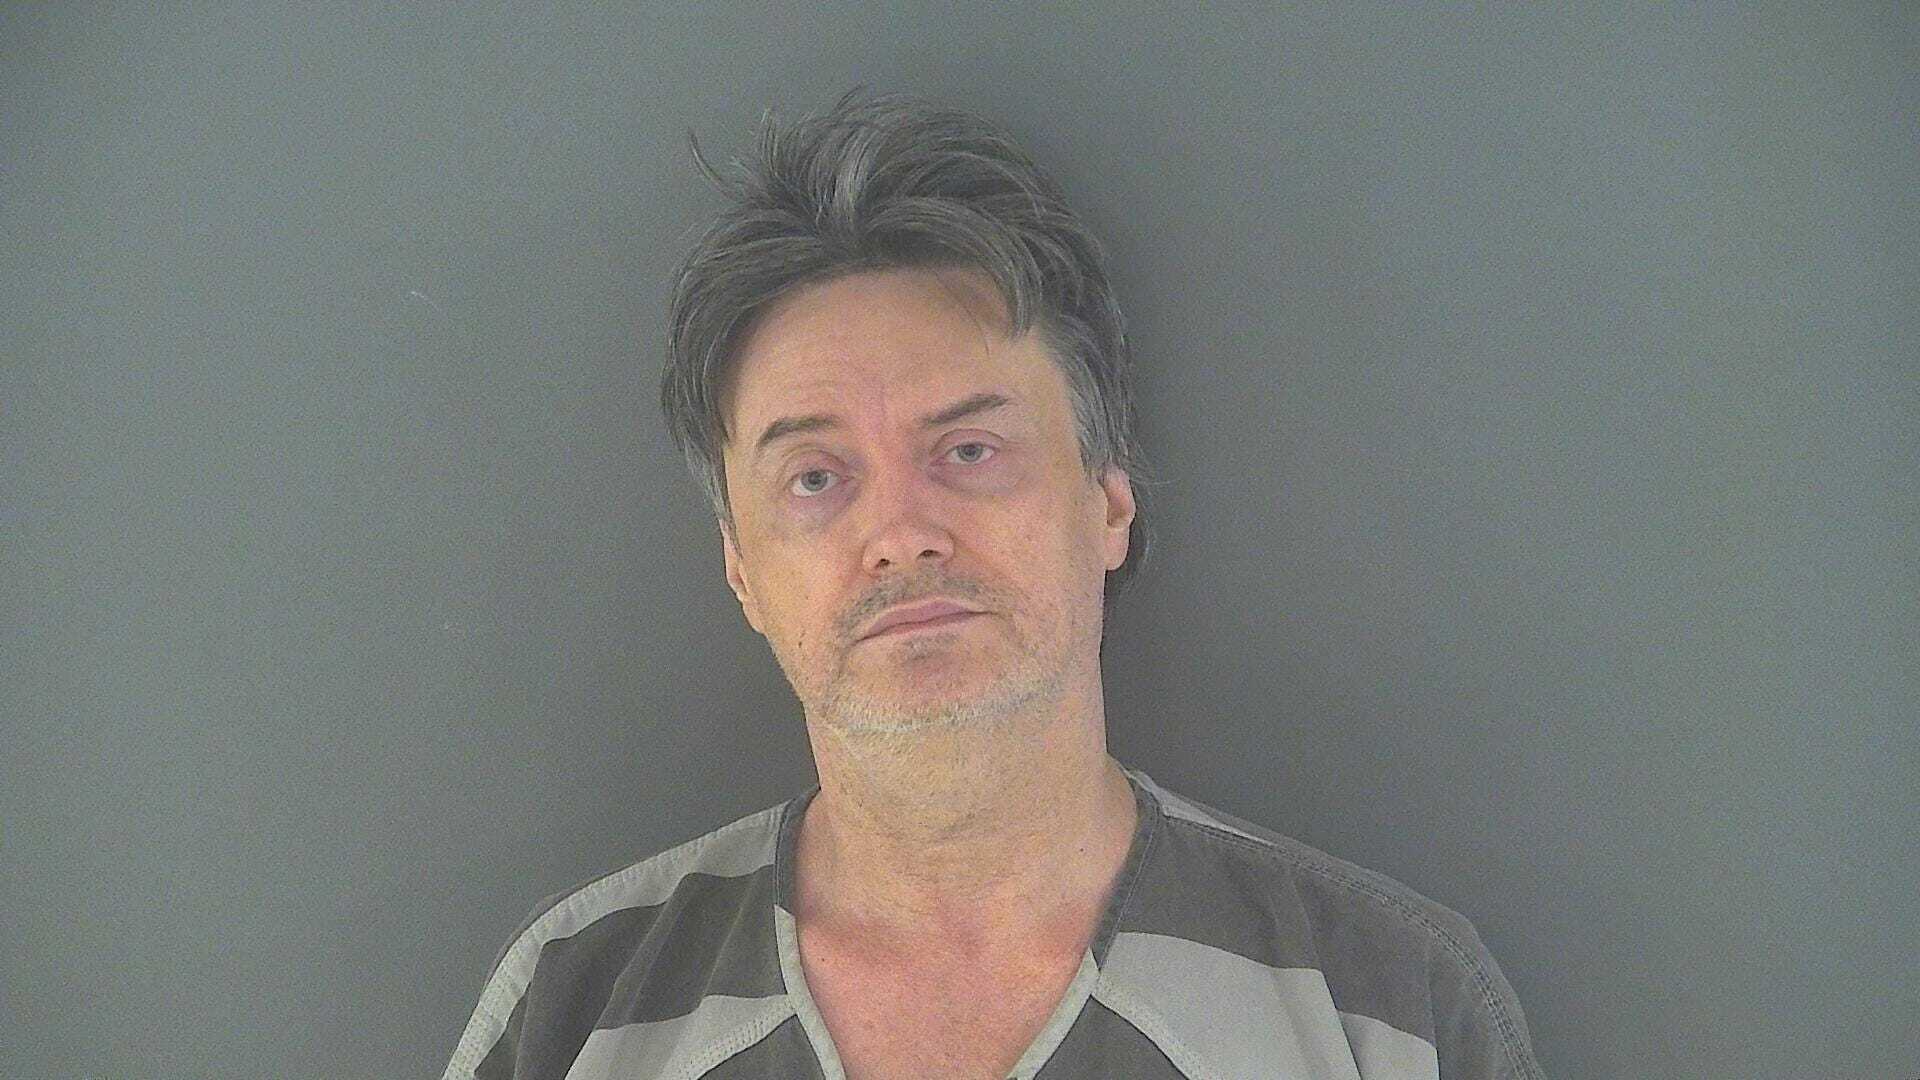 [IMAGE] Steven Hessler arrested on charges in Shelby County rapes from 1980s